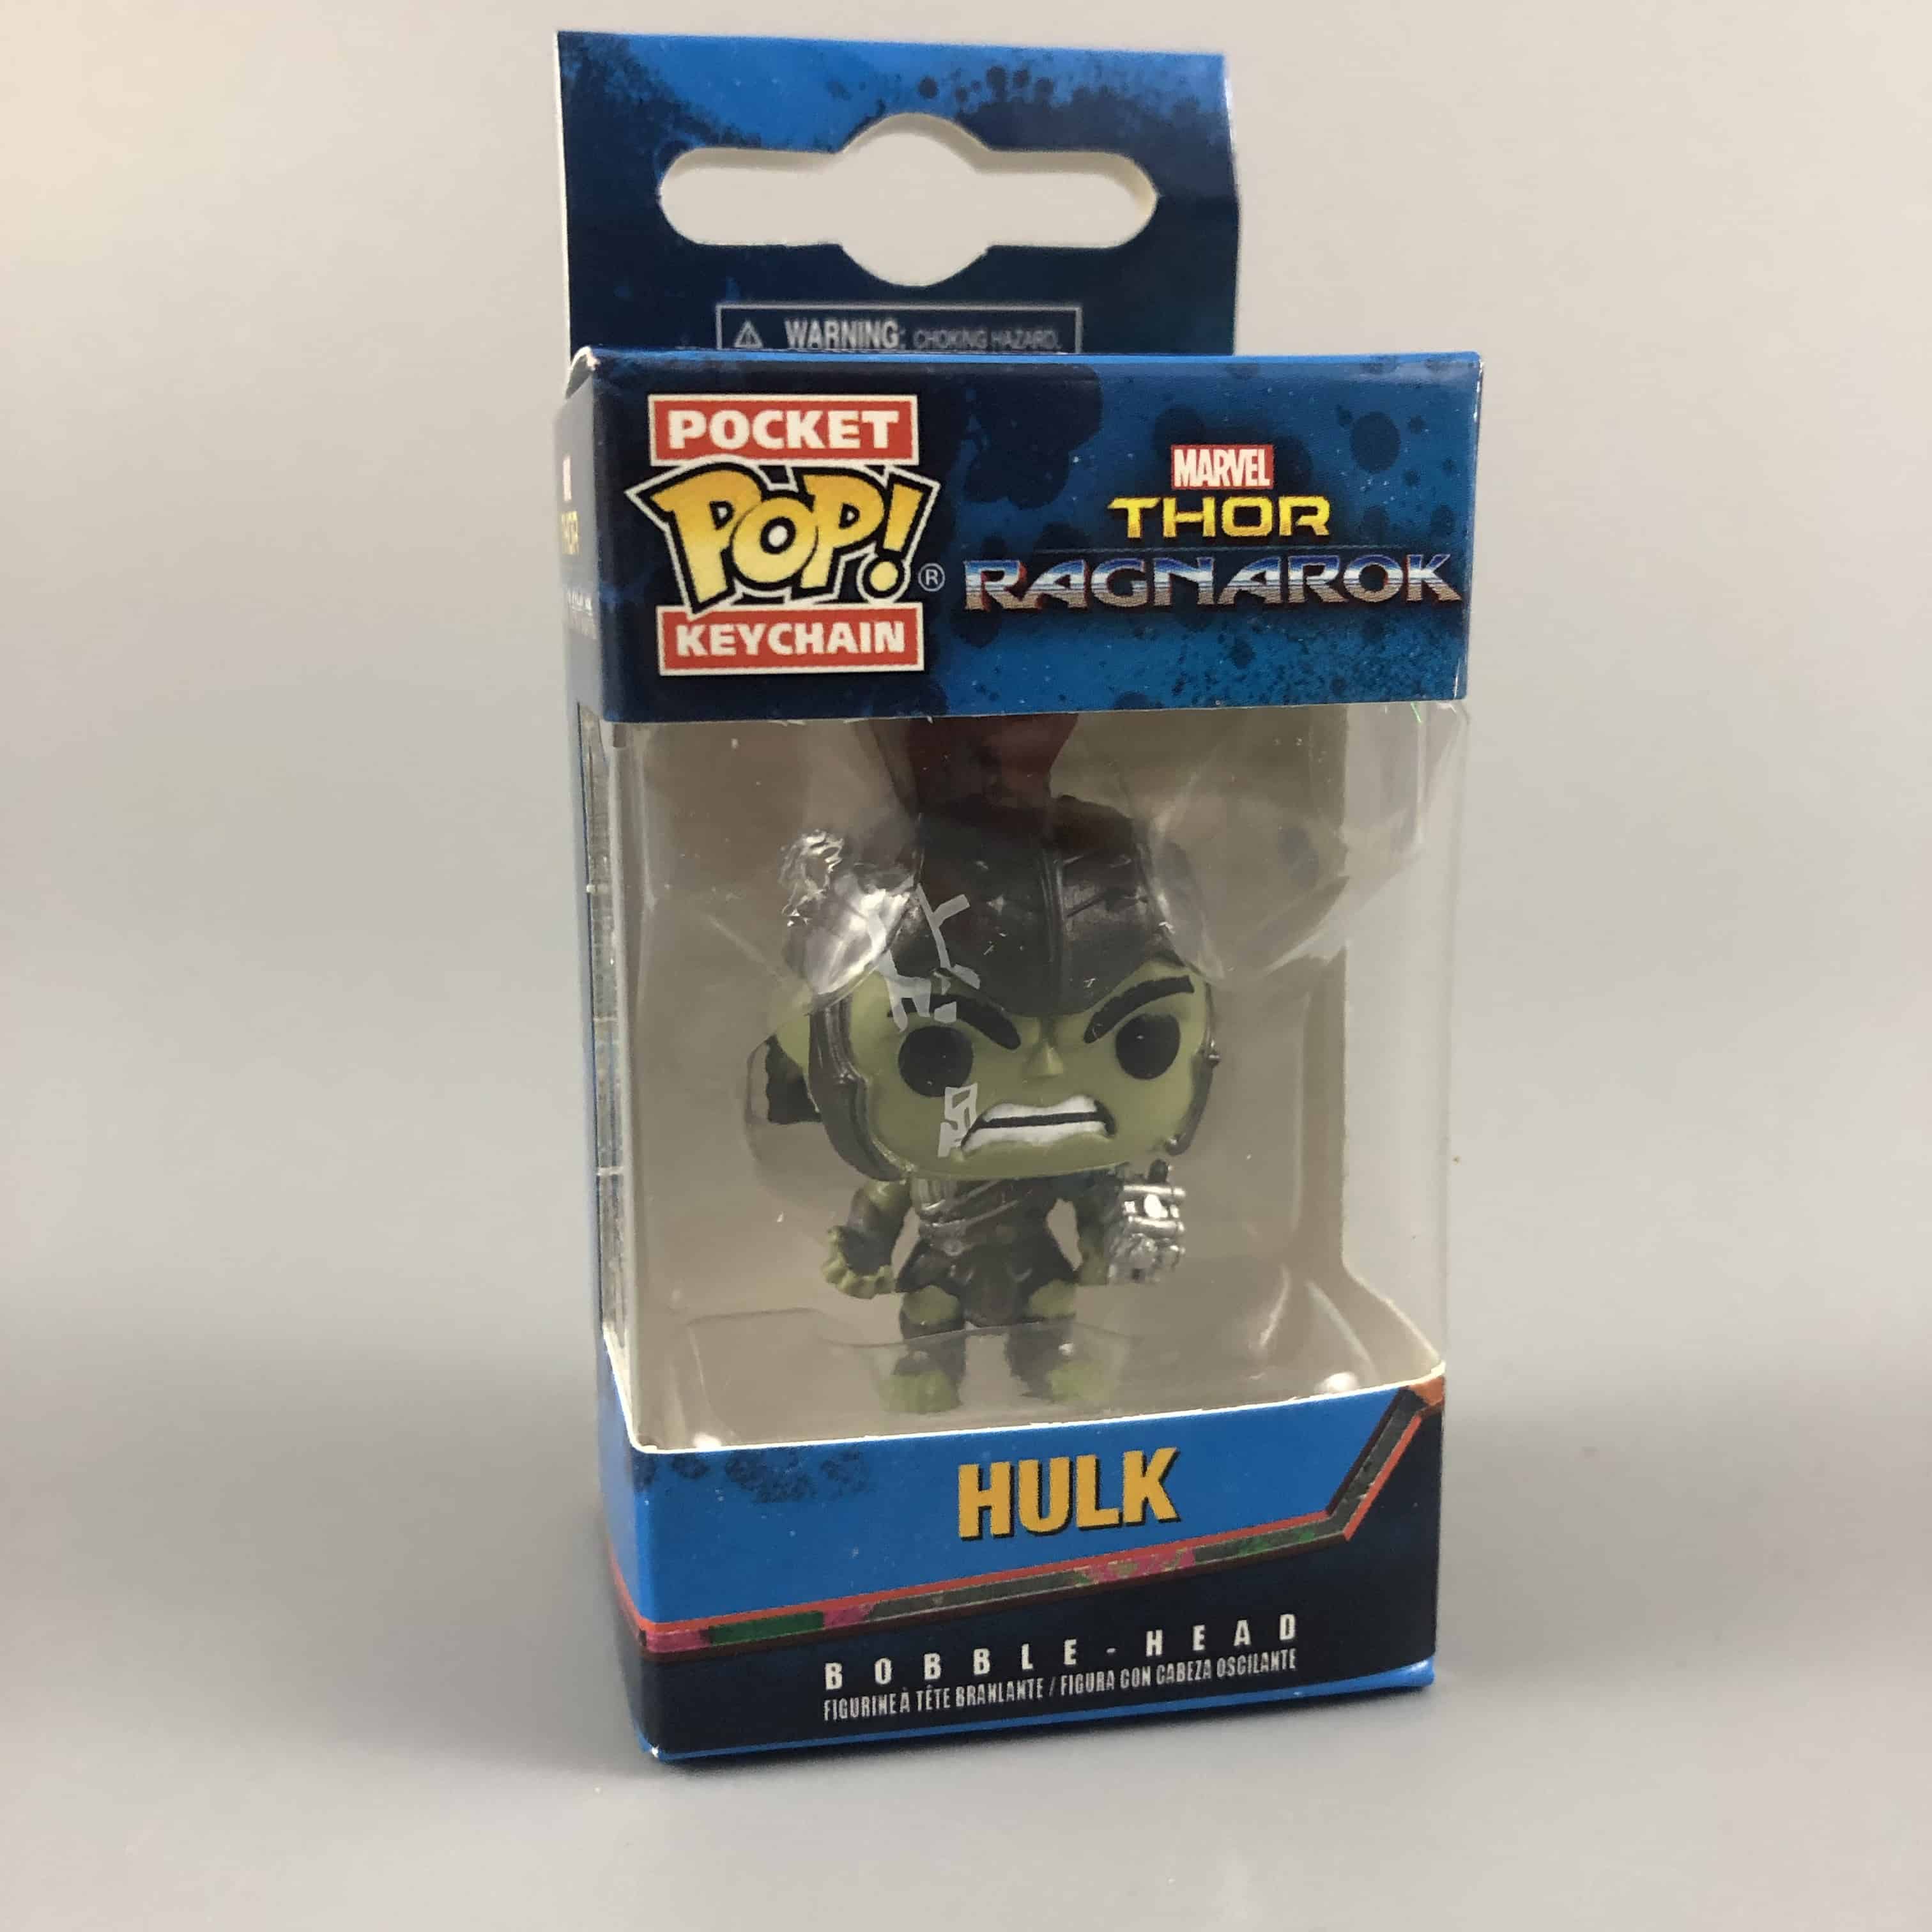 Marvel Collector Corps December 2017 Subscription Box Review - Hulk ...